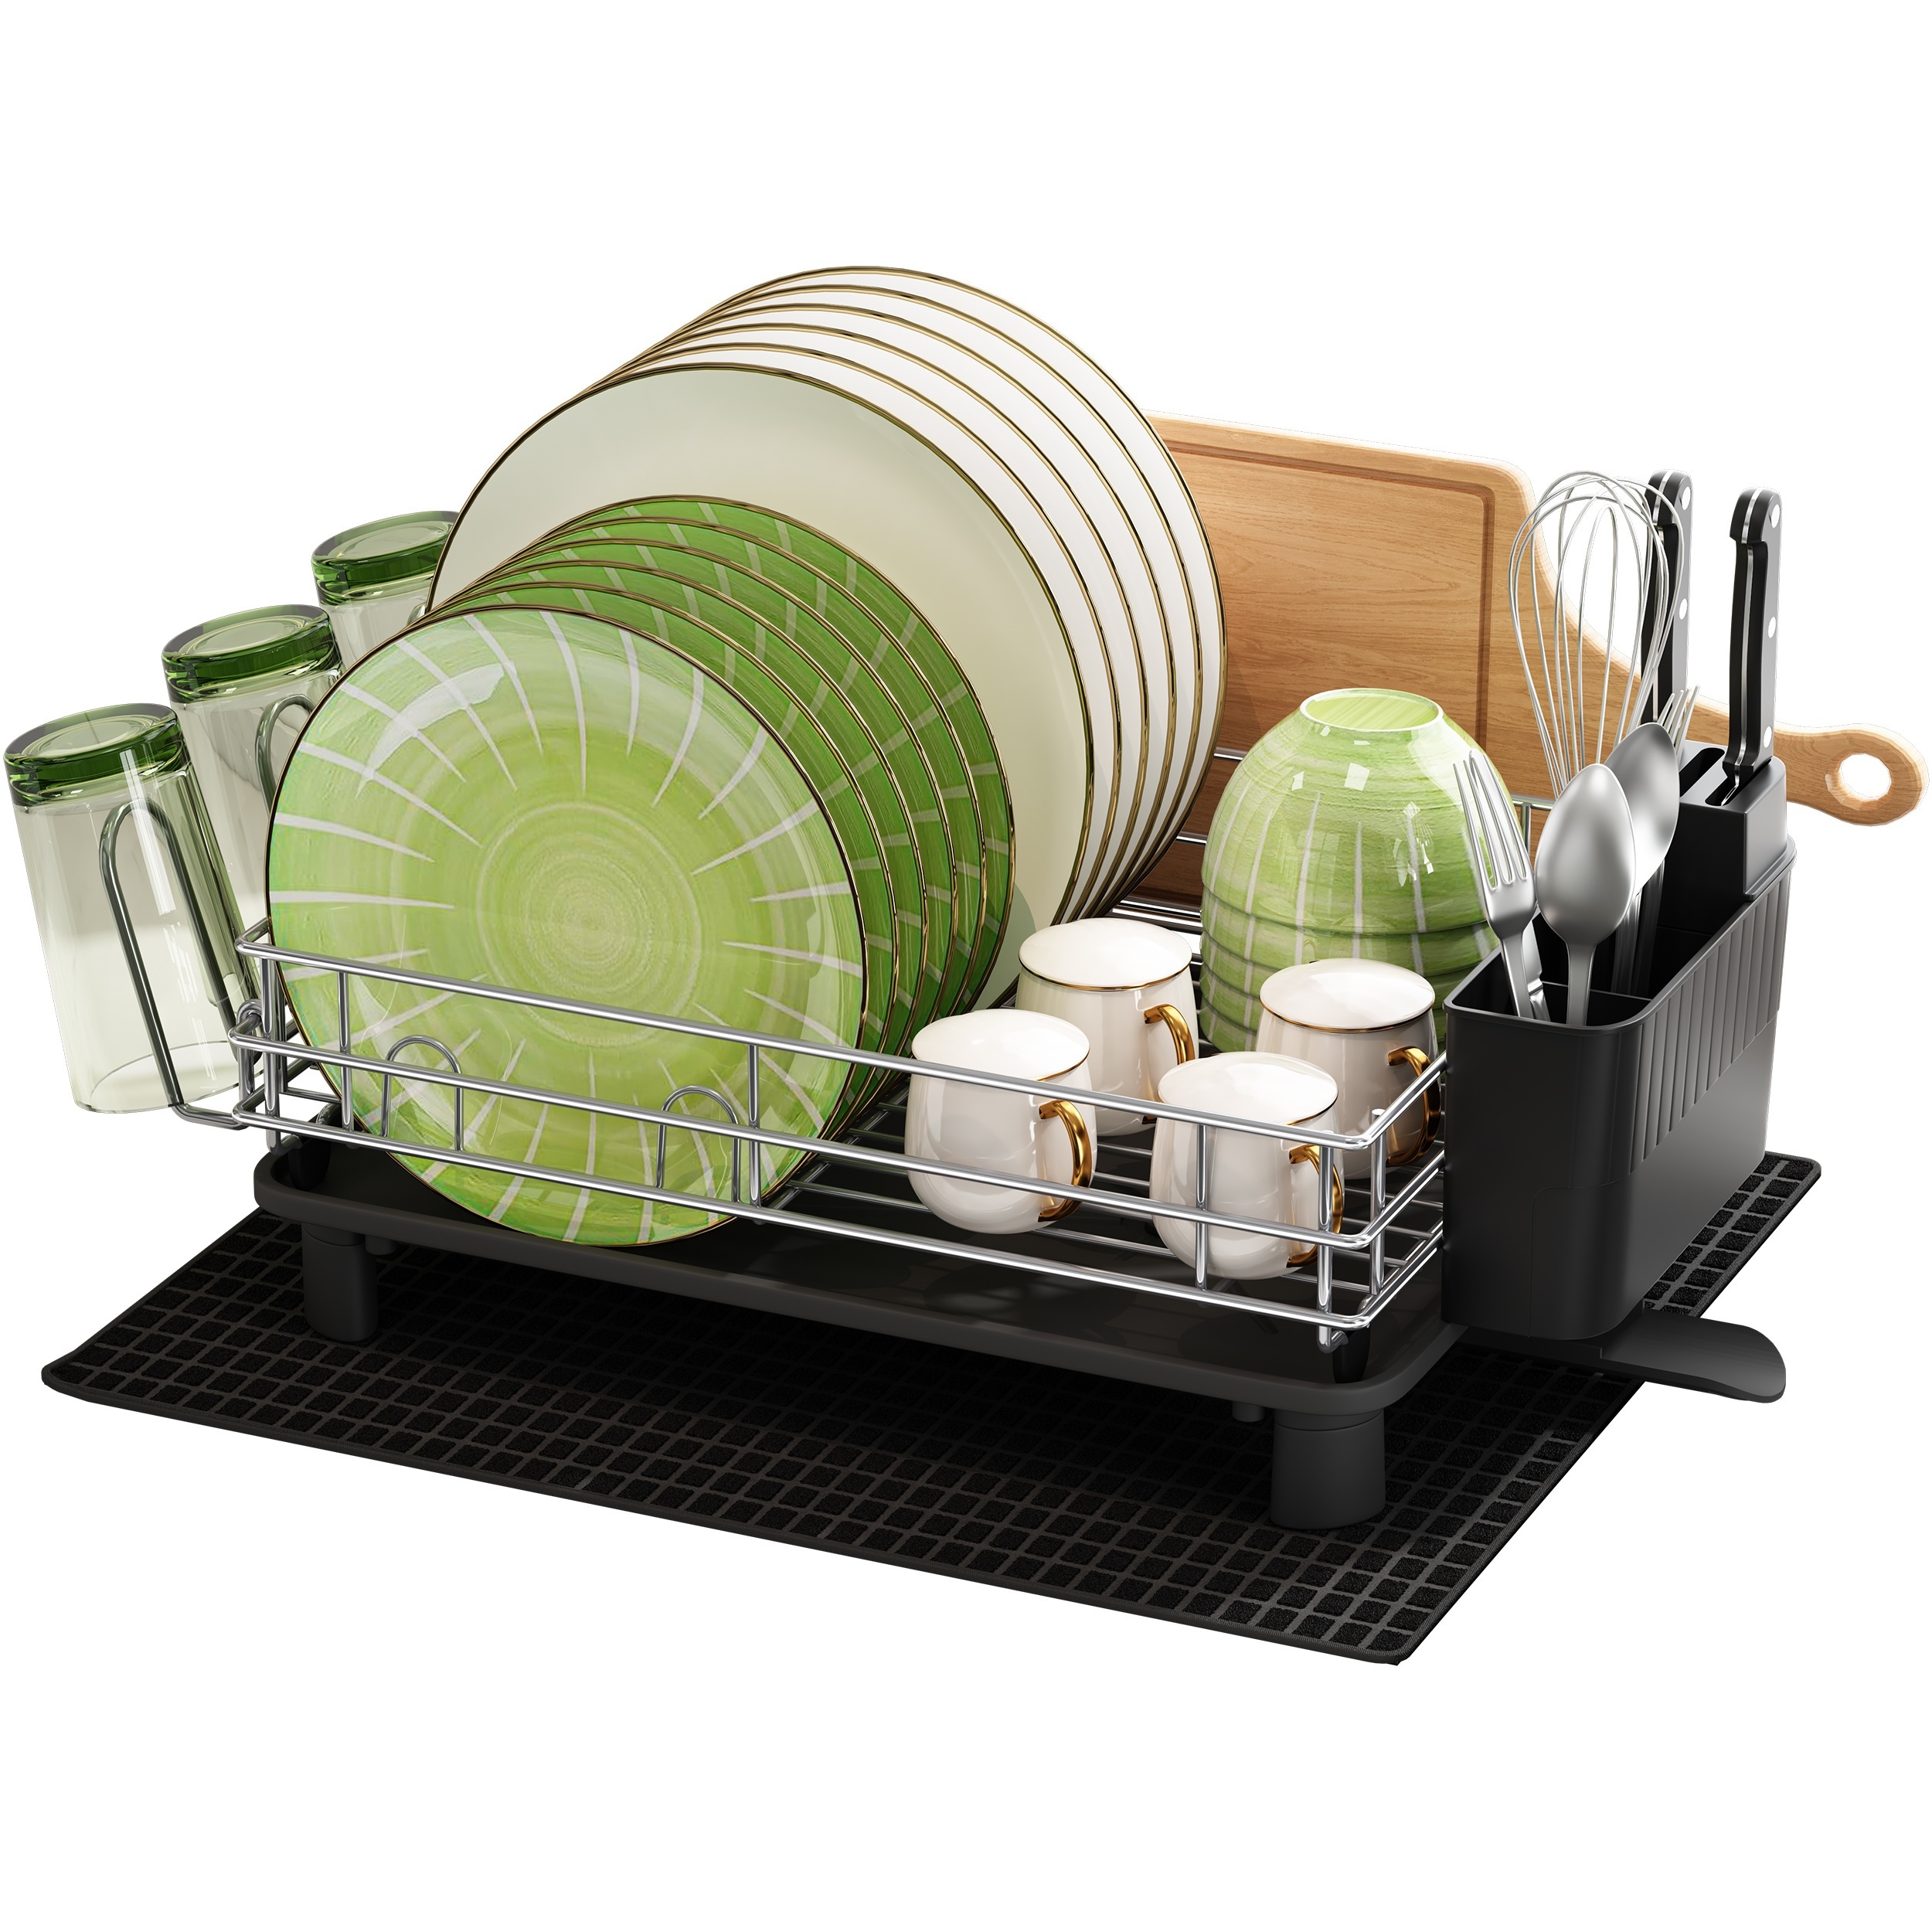 MAJALiS Dish Drying Rack and Drainboard Set, 2 Tier Stainless Steel Large  Dish Strainer with Drainage, Utensil Holder and Extra Drying Mat, Dish